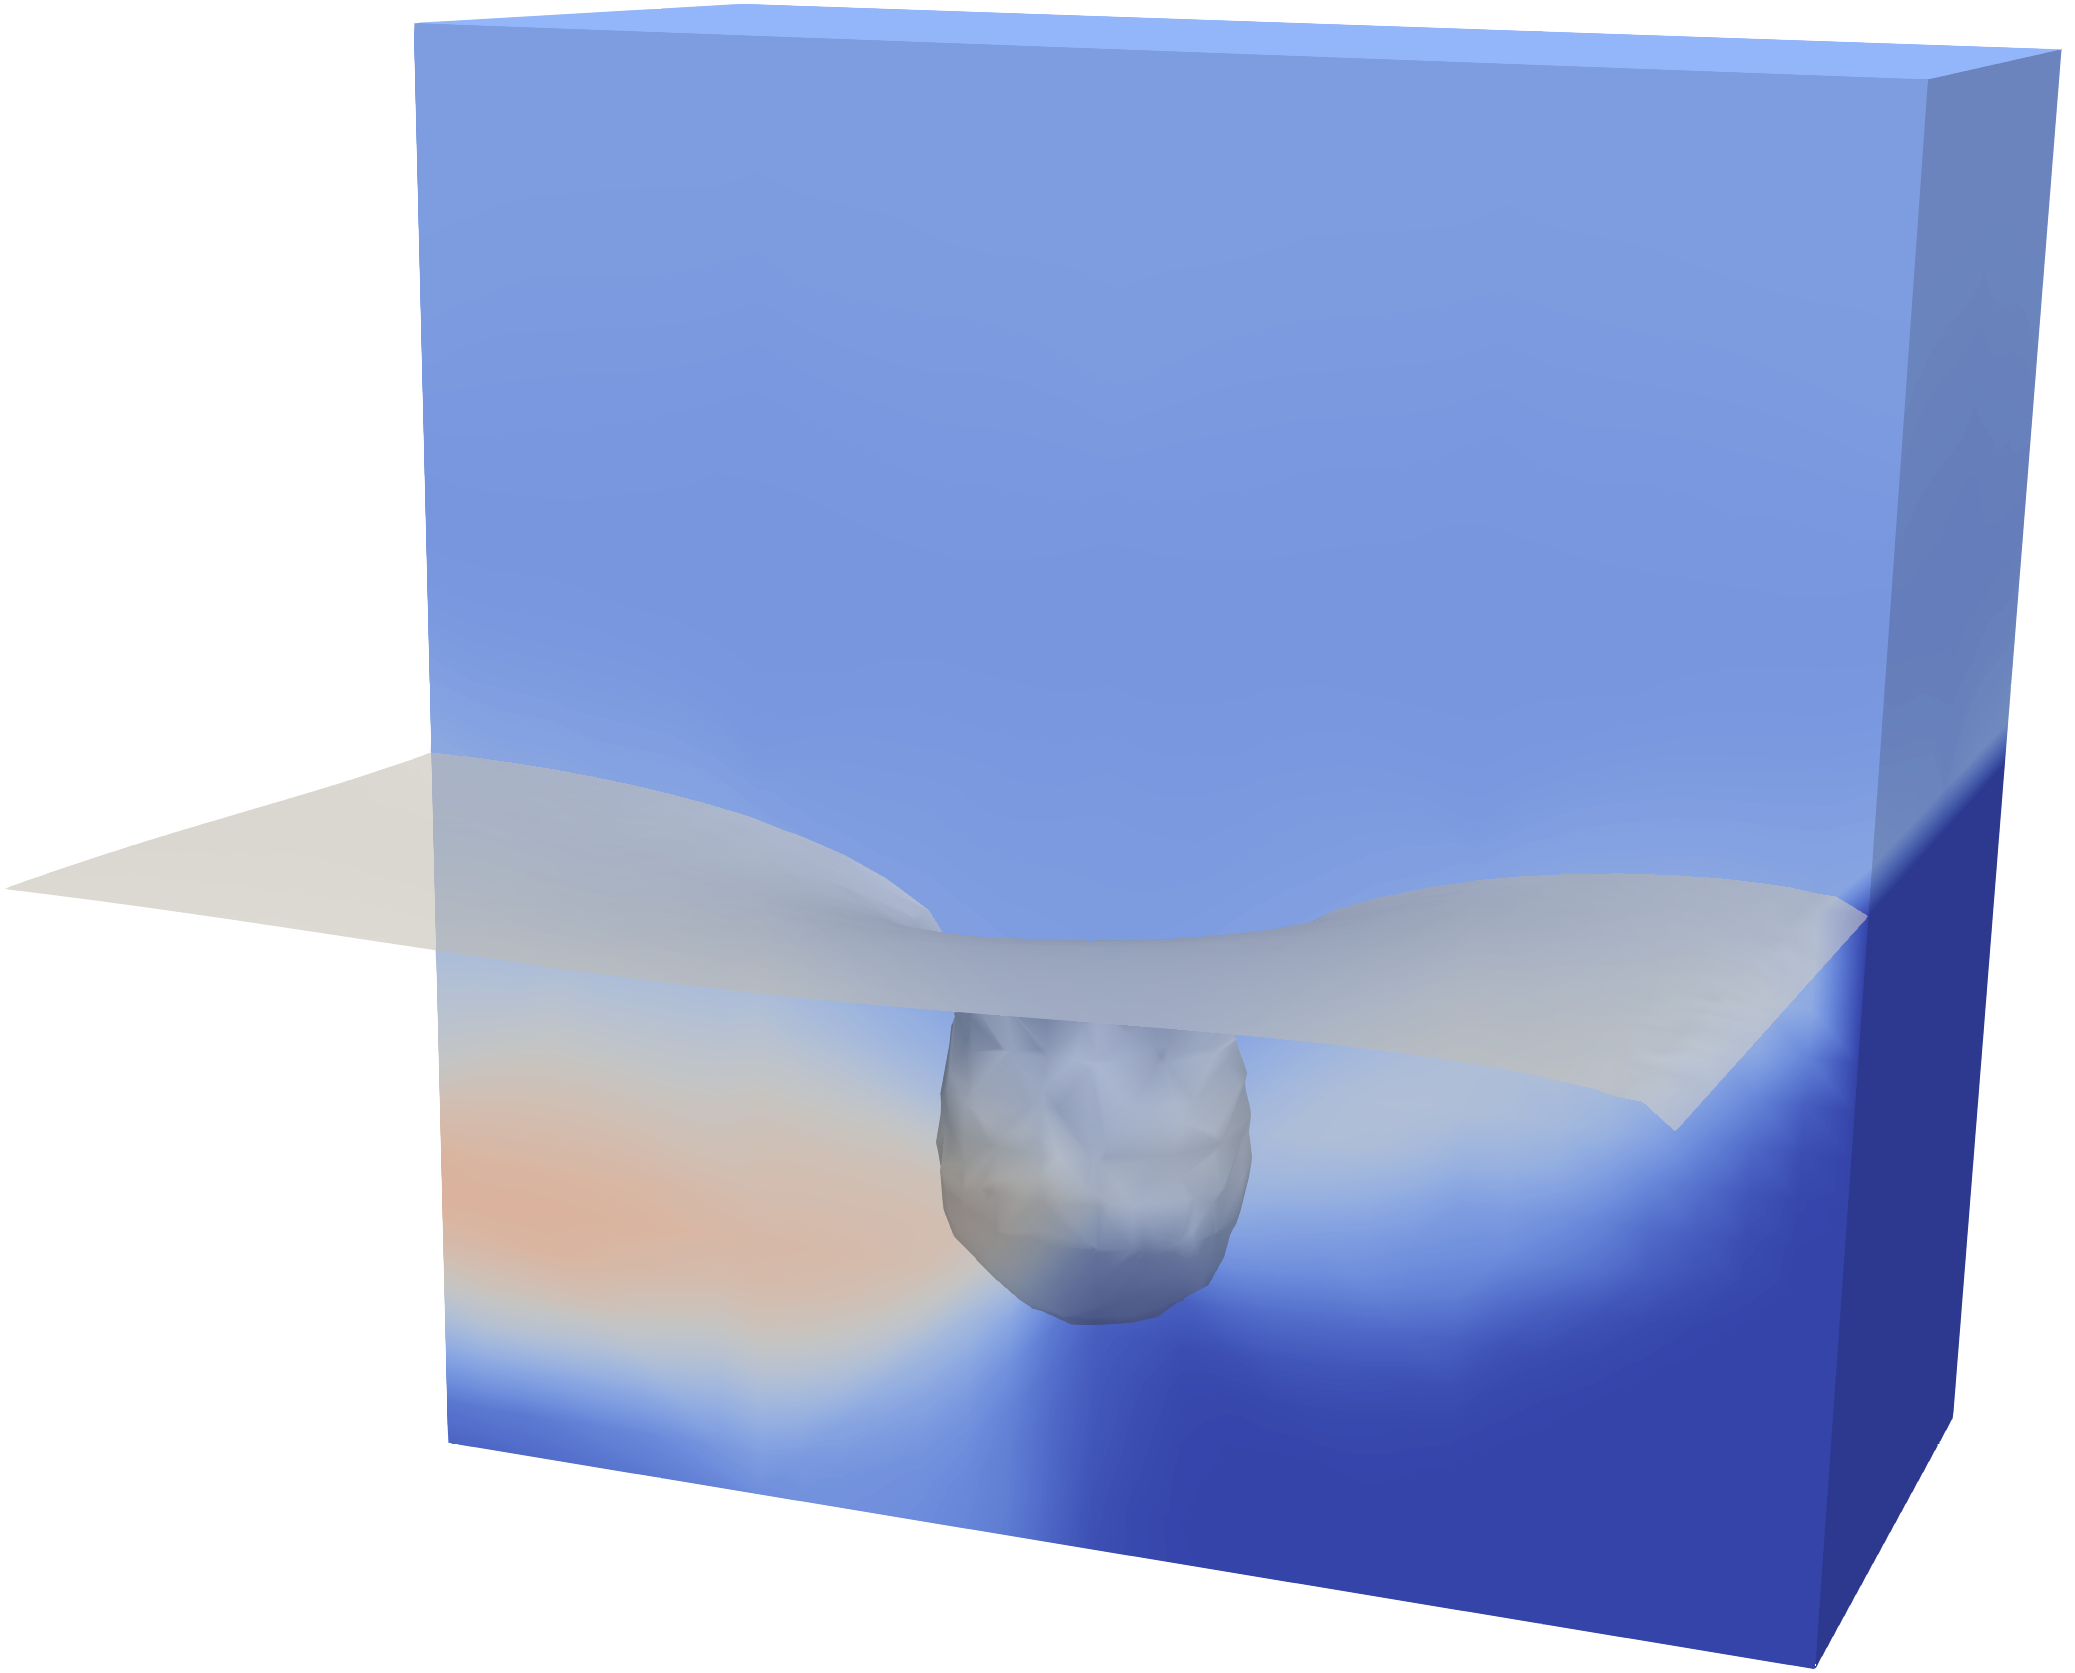 pressure profile in a quadratic domain, showing the 3D phreatic surface.